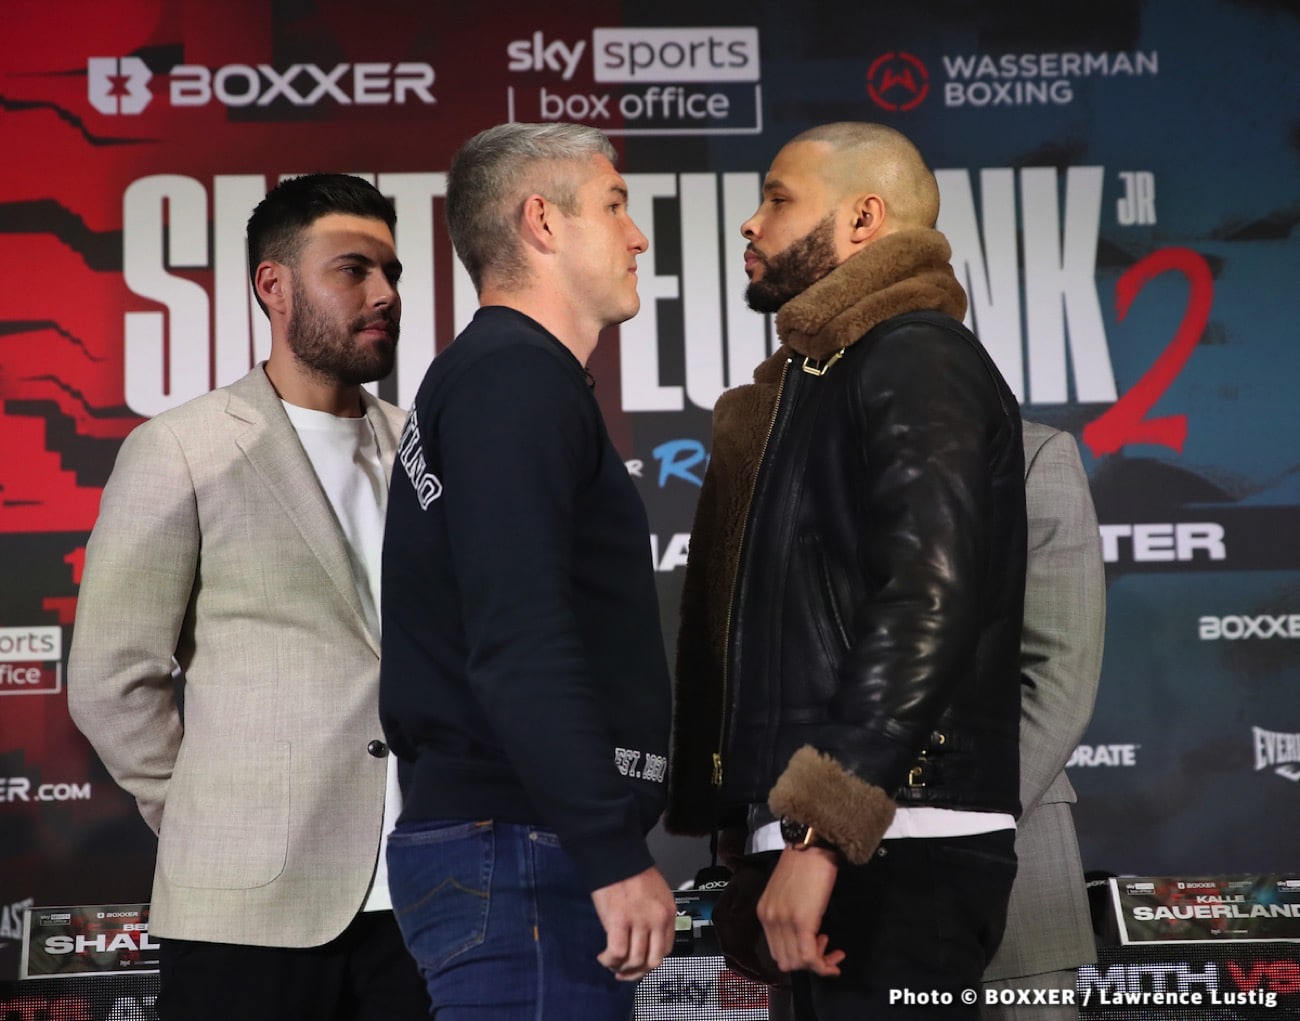 Liam Smith vs Chris Eubank Jr Rematch: Start Time, Date, How To Watch